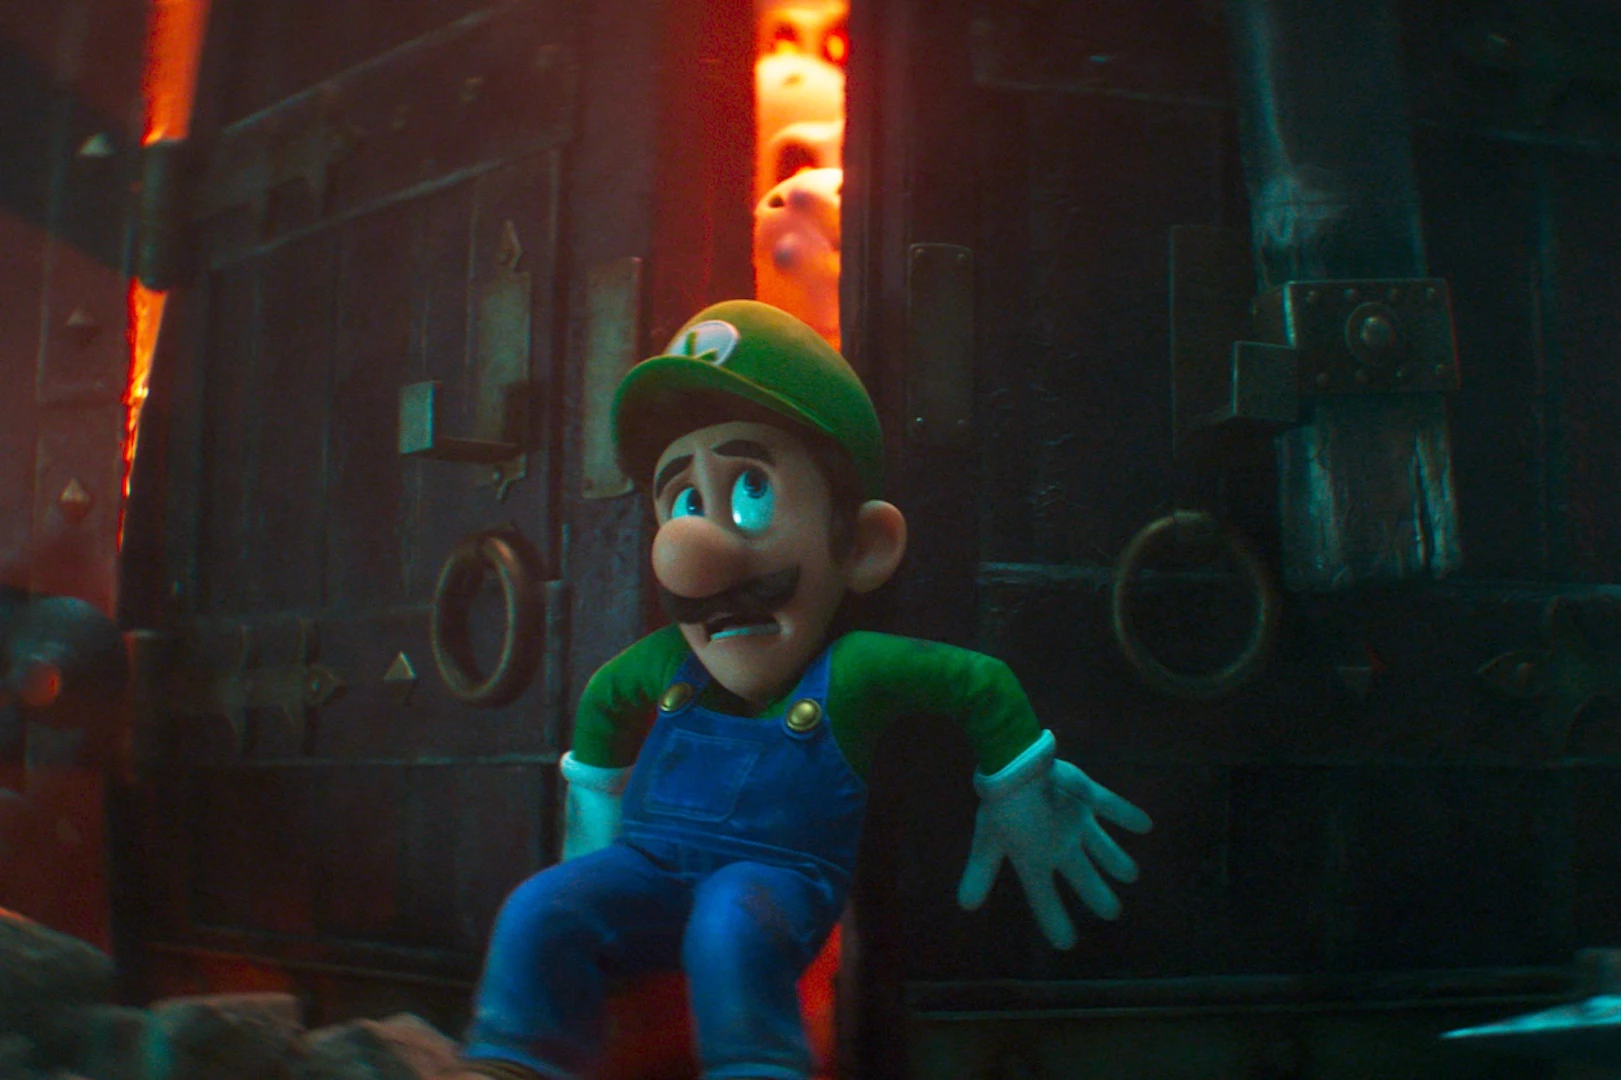 Pushing Buttons: The Super Mario Bros Movie is just fine – but